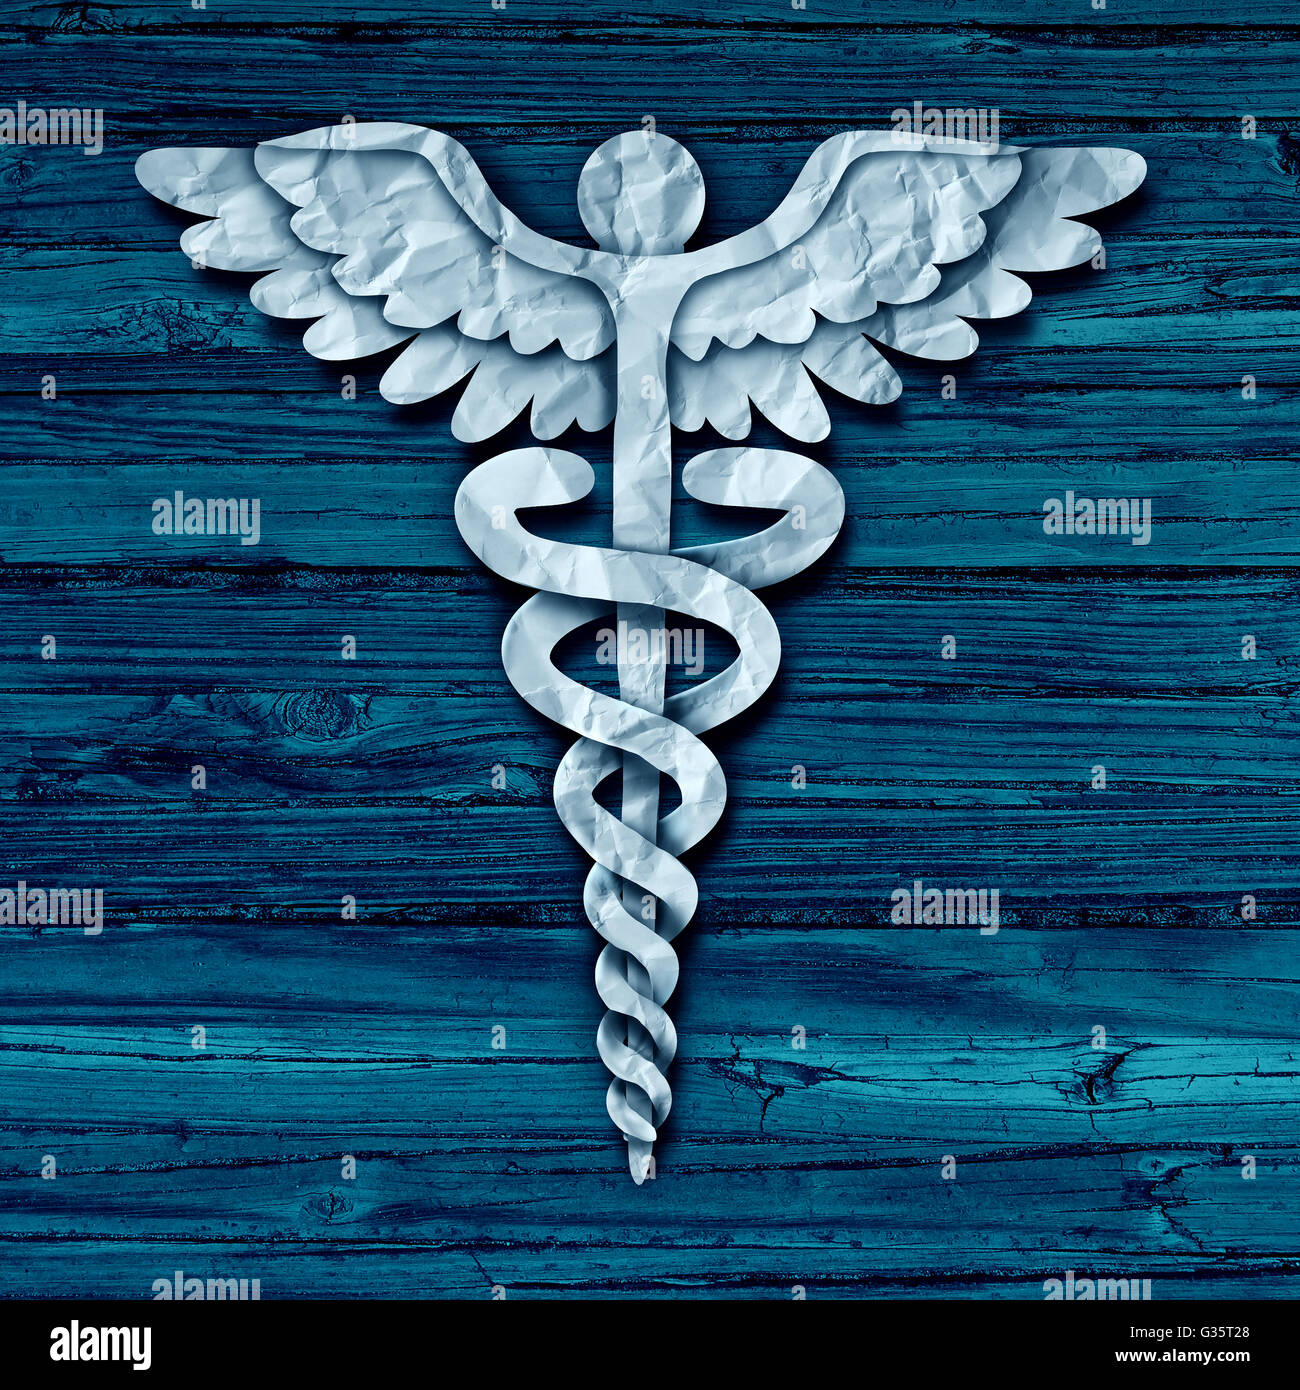 Medical symbol concept as cut crumpled paper shaped as a healthcare treatment icon on old grunge blue wood as a metaphor for hospital care or pharmacy as a photo realistic illustration. Stock Photo